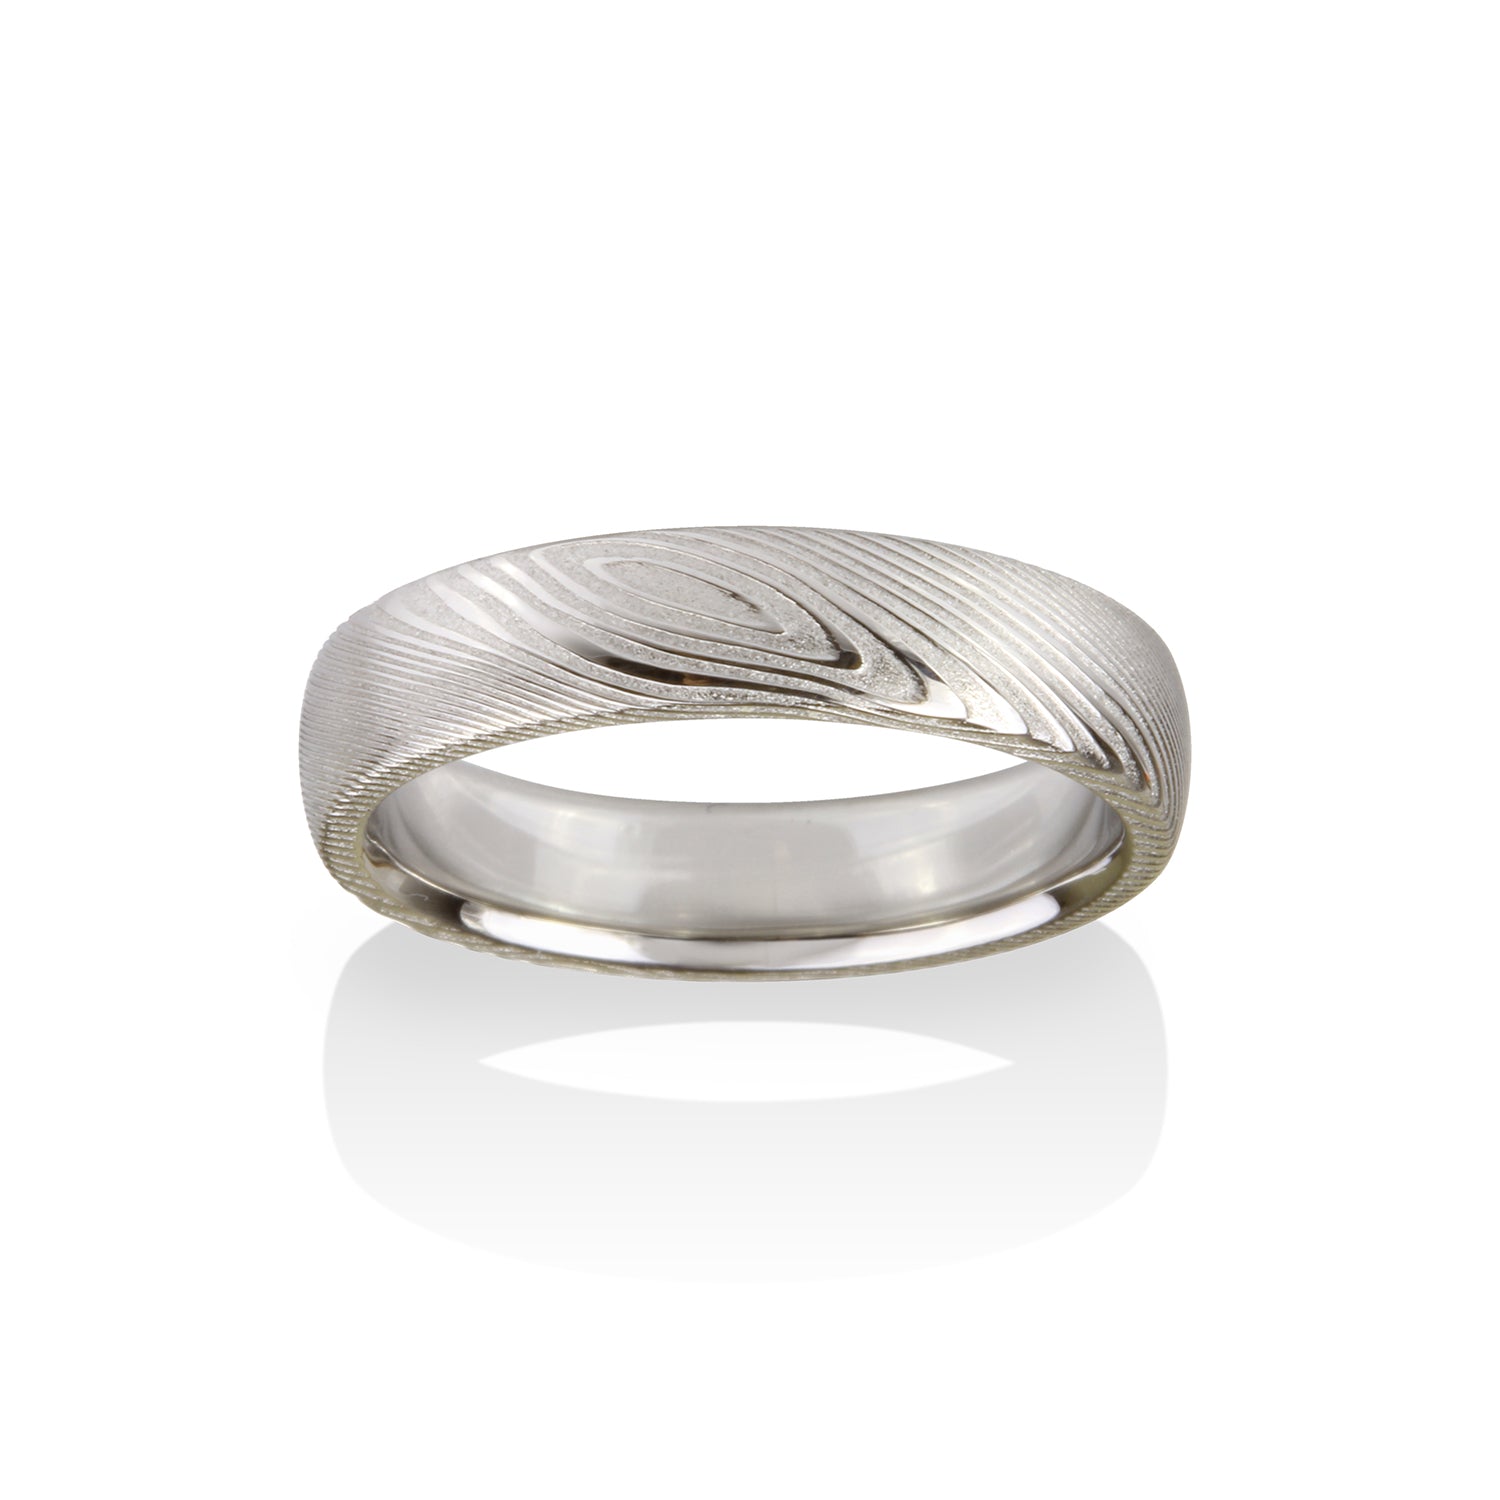 Pathways Damascus Steel Ring by Chris Ploof - Talisman Collection Fine Jewelers